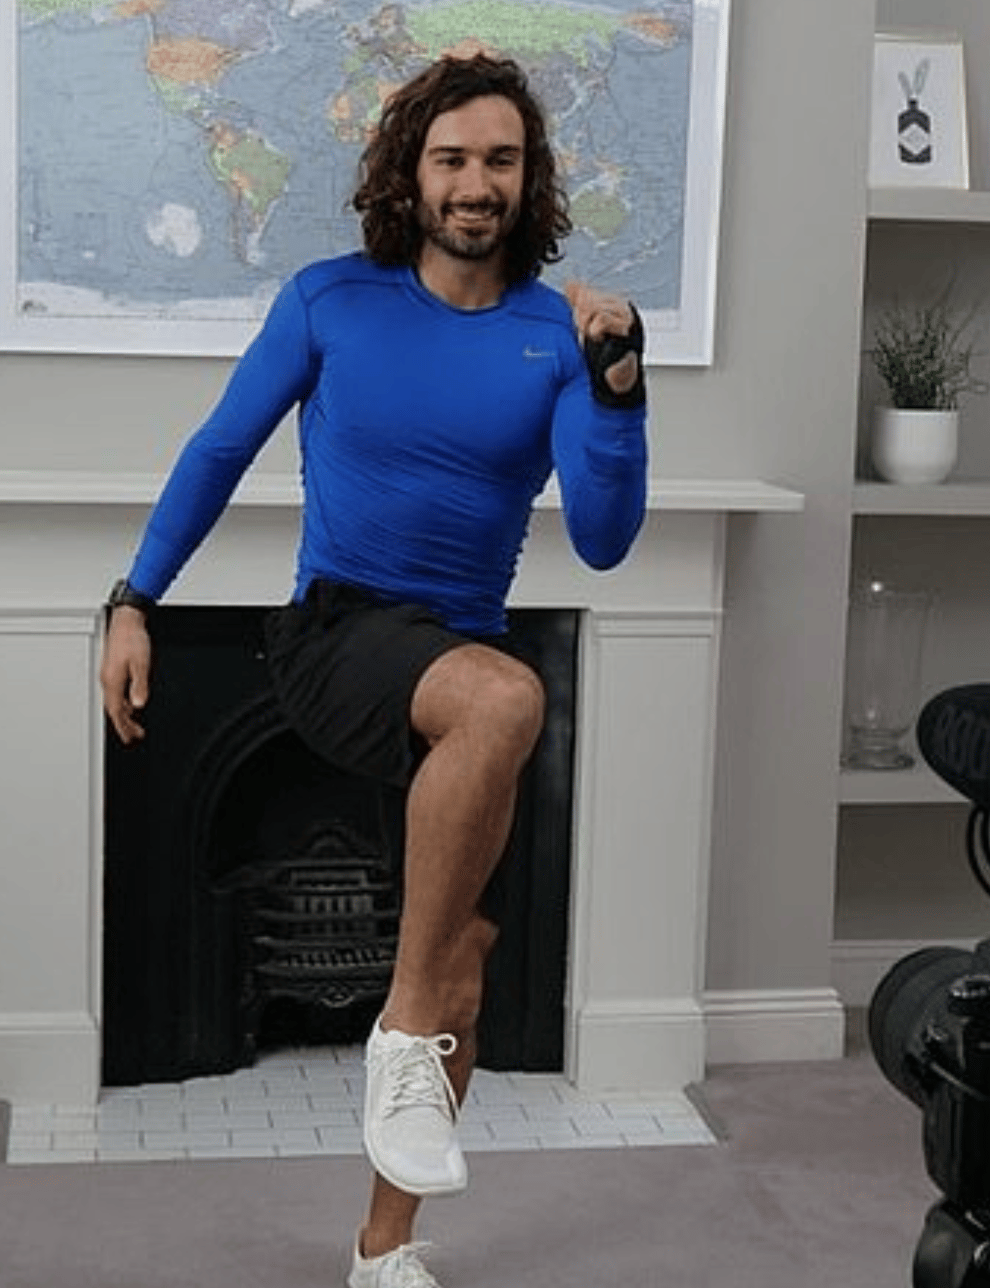 The Body Coach has been keeping the nation active during 'lockdown' (Instagram: @thebodycoach)